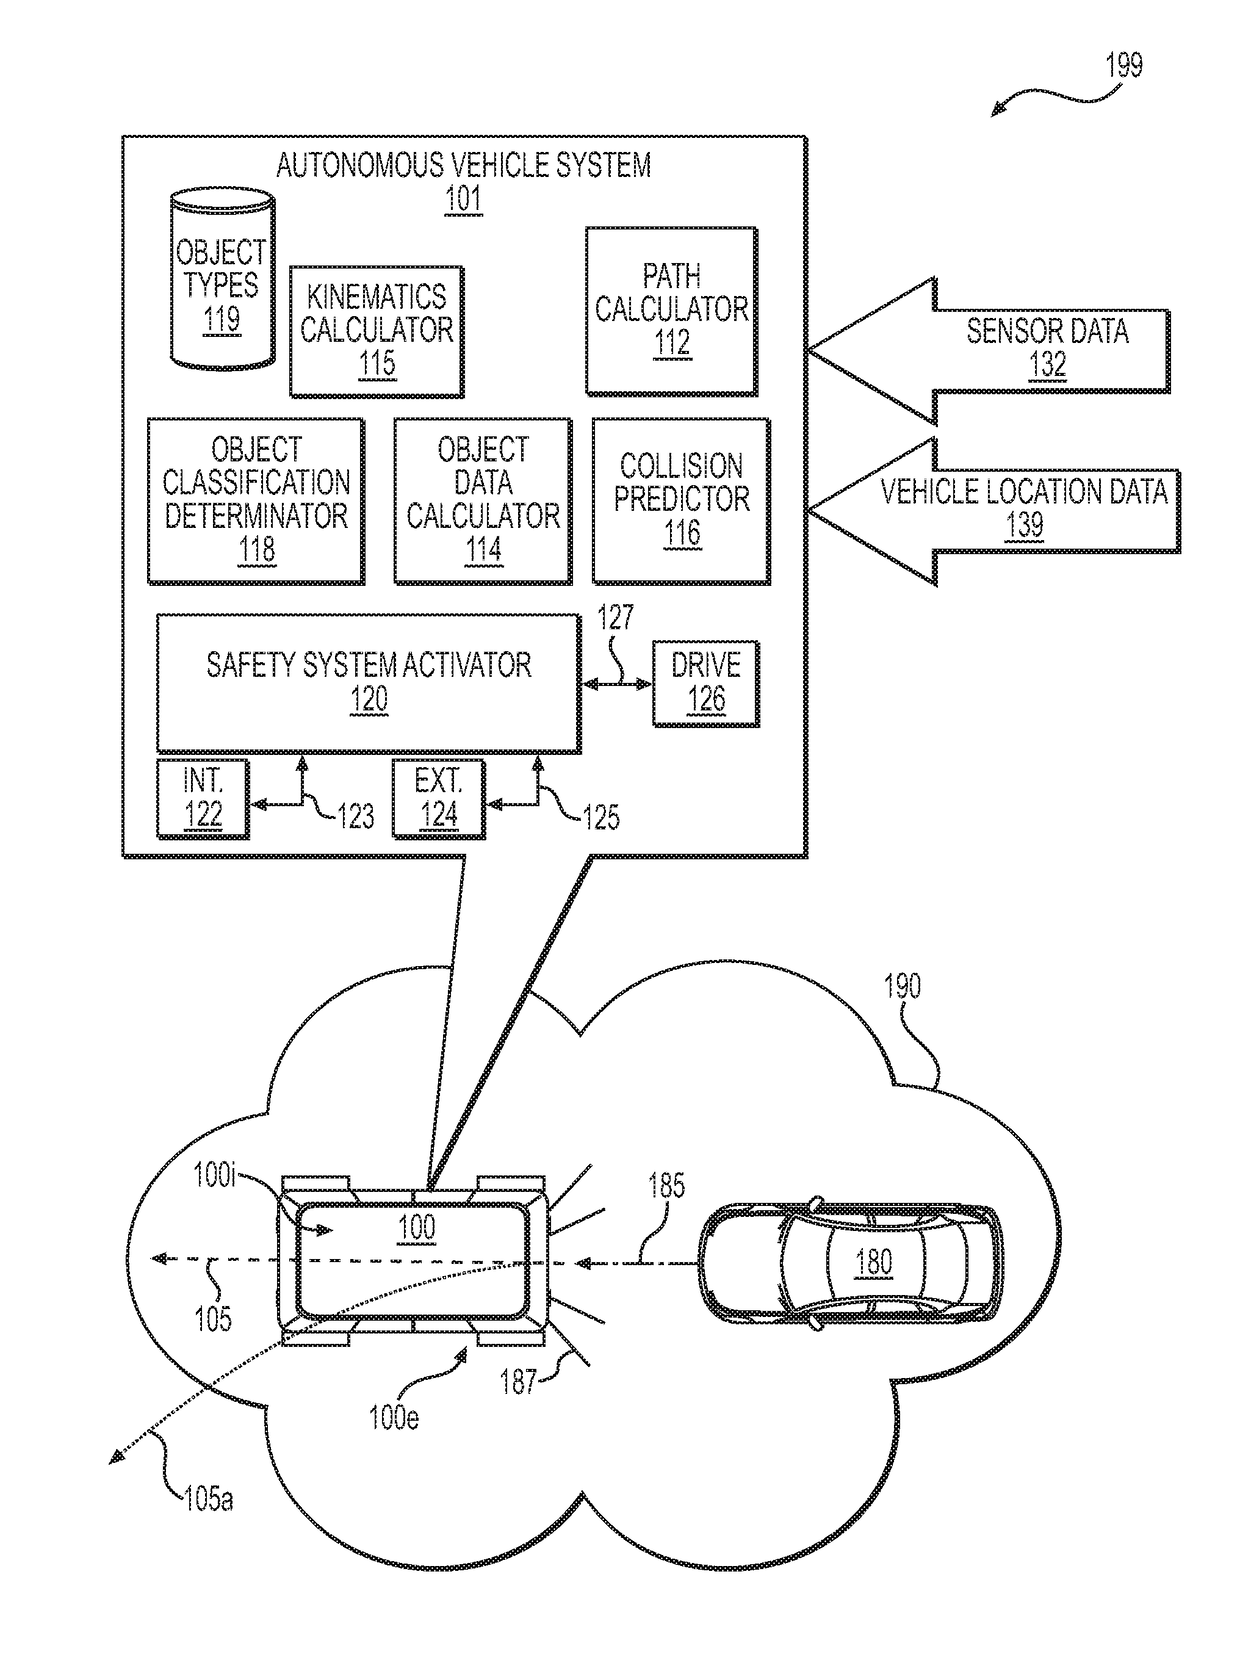 System of configuring active lighting to indicate directionality of an autonomous vehicle